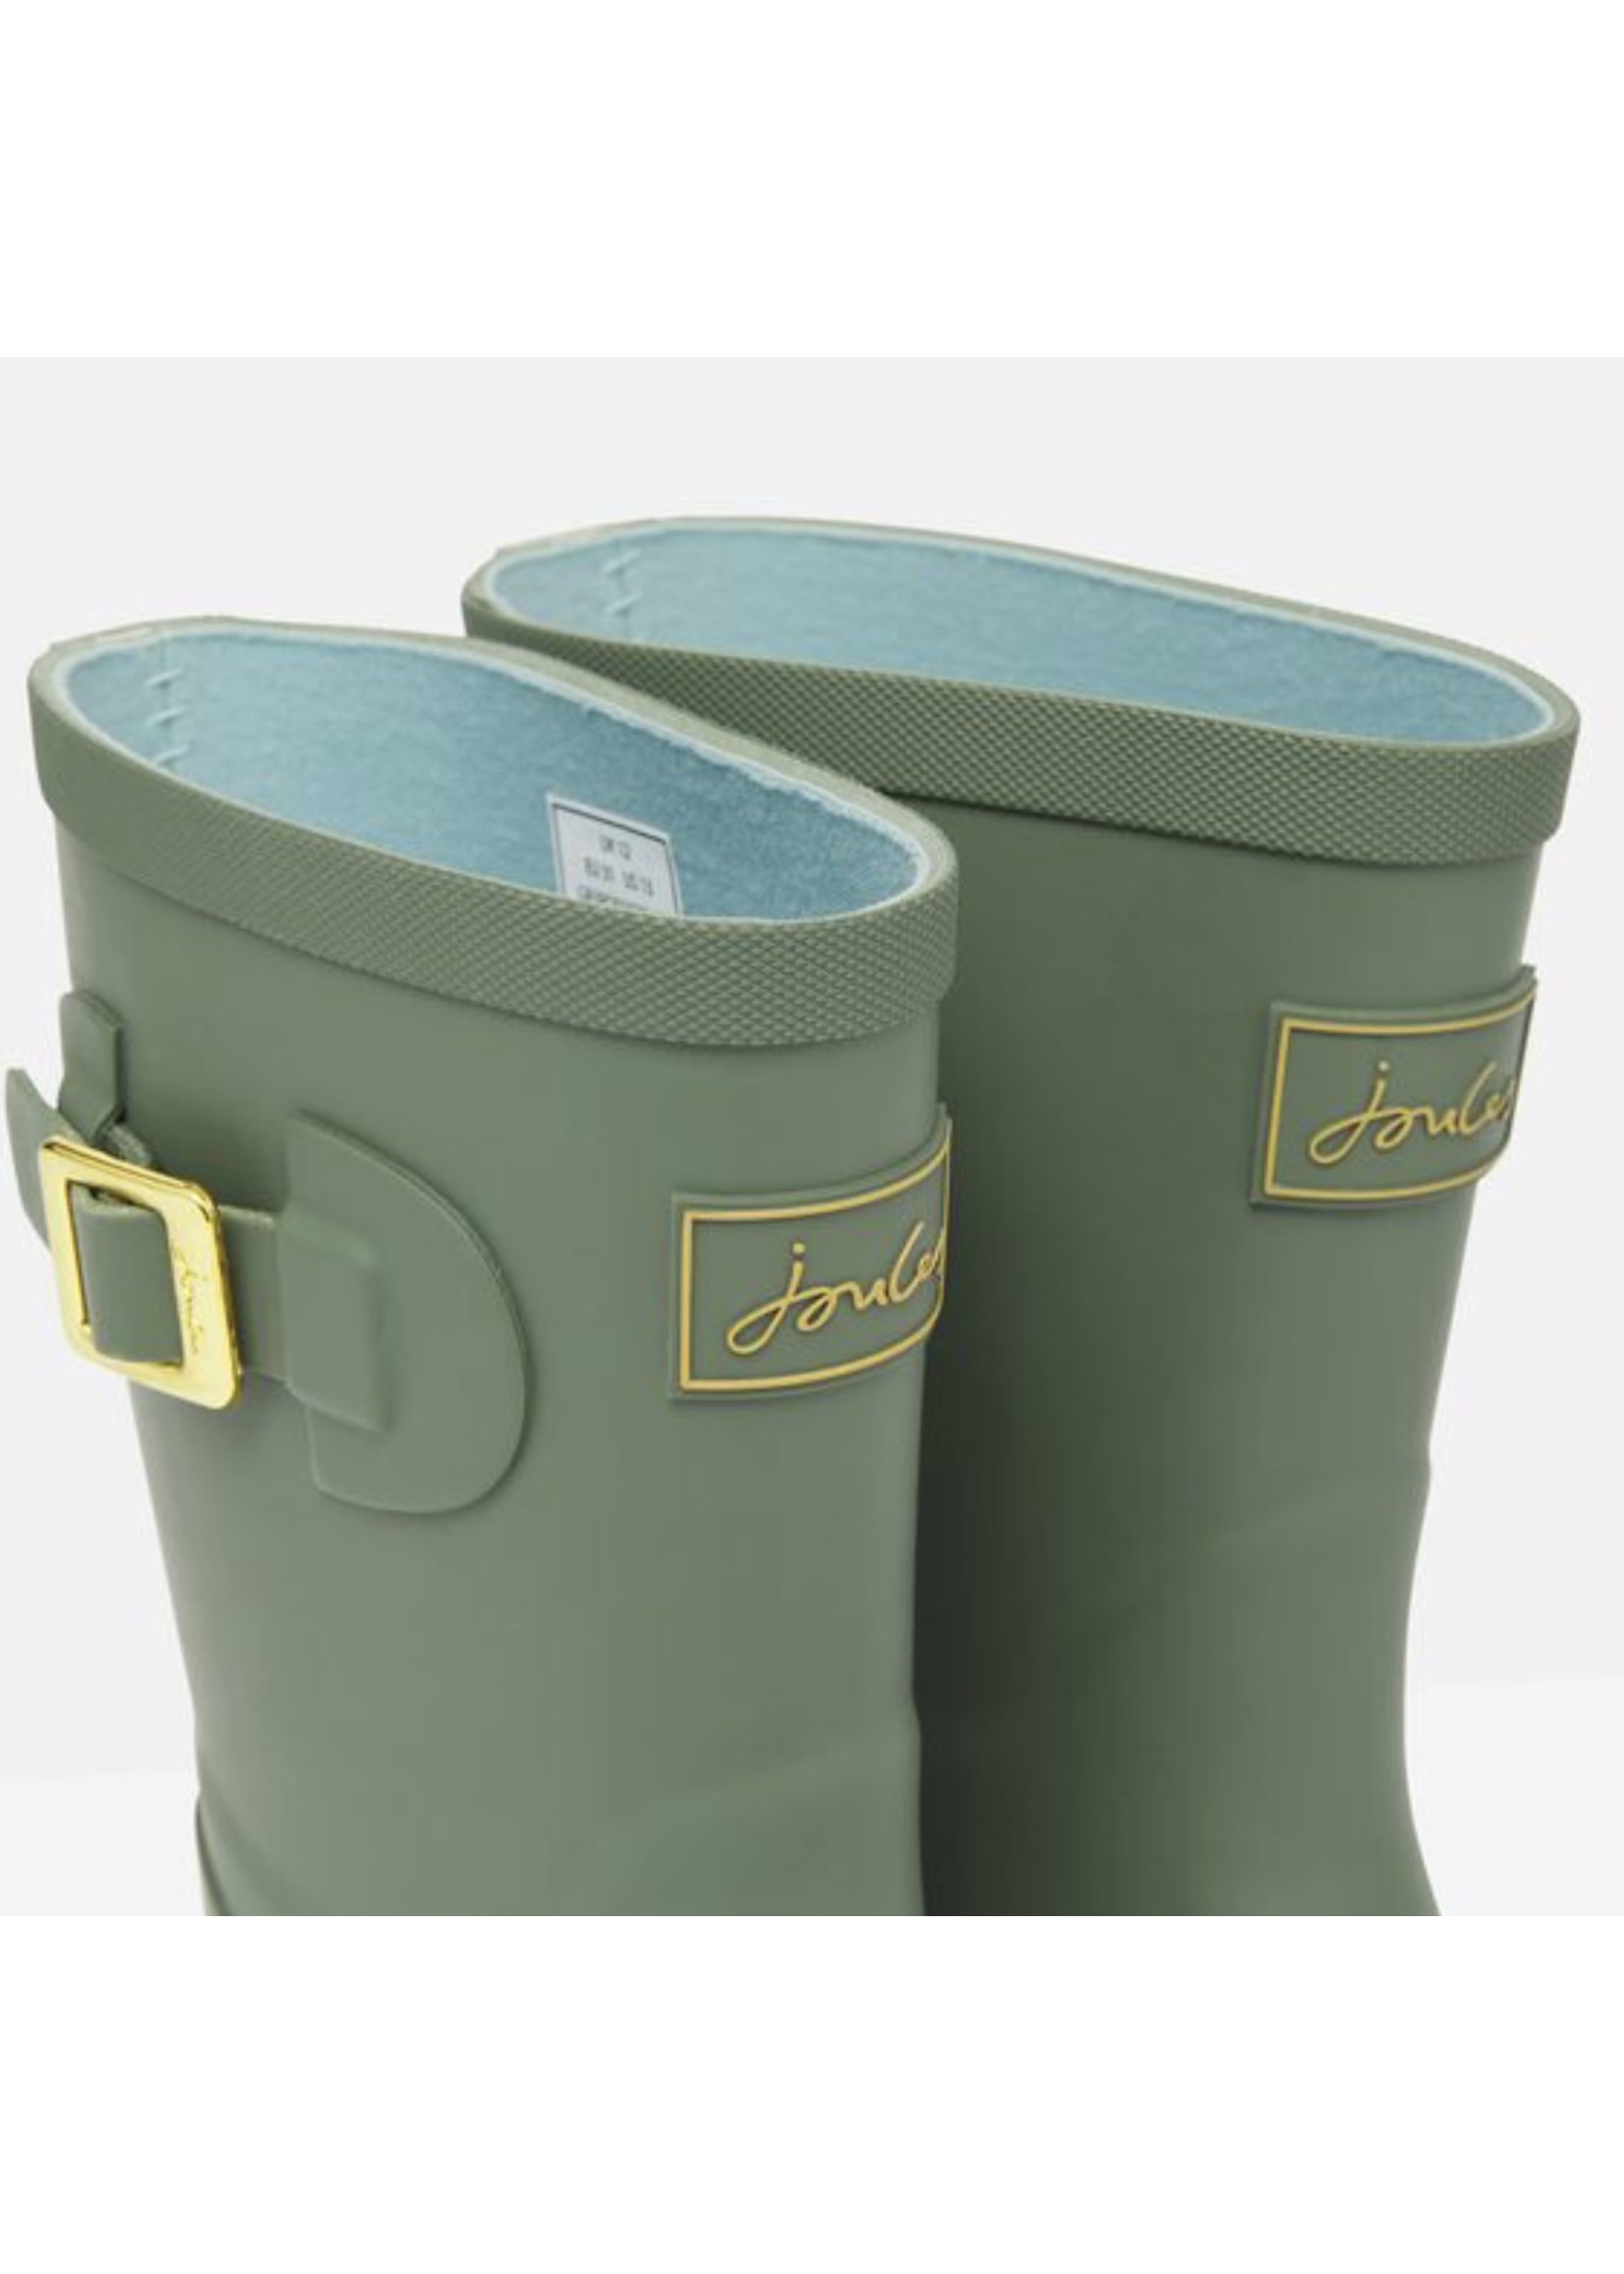 Joules Joules Tall Wellie